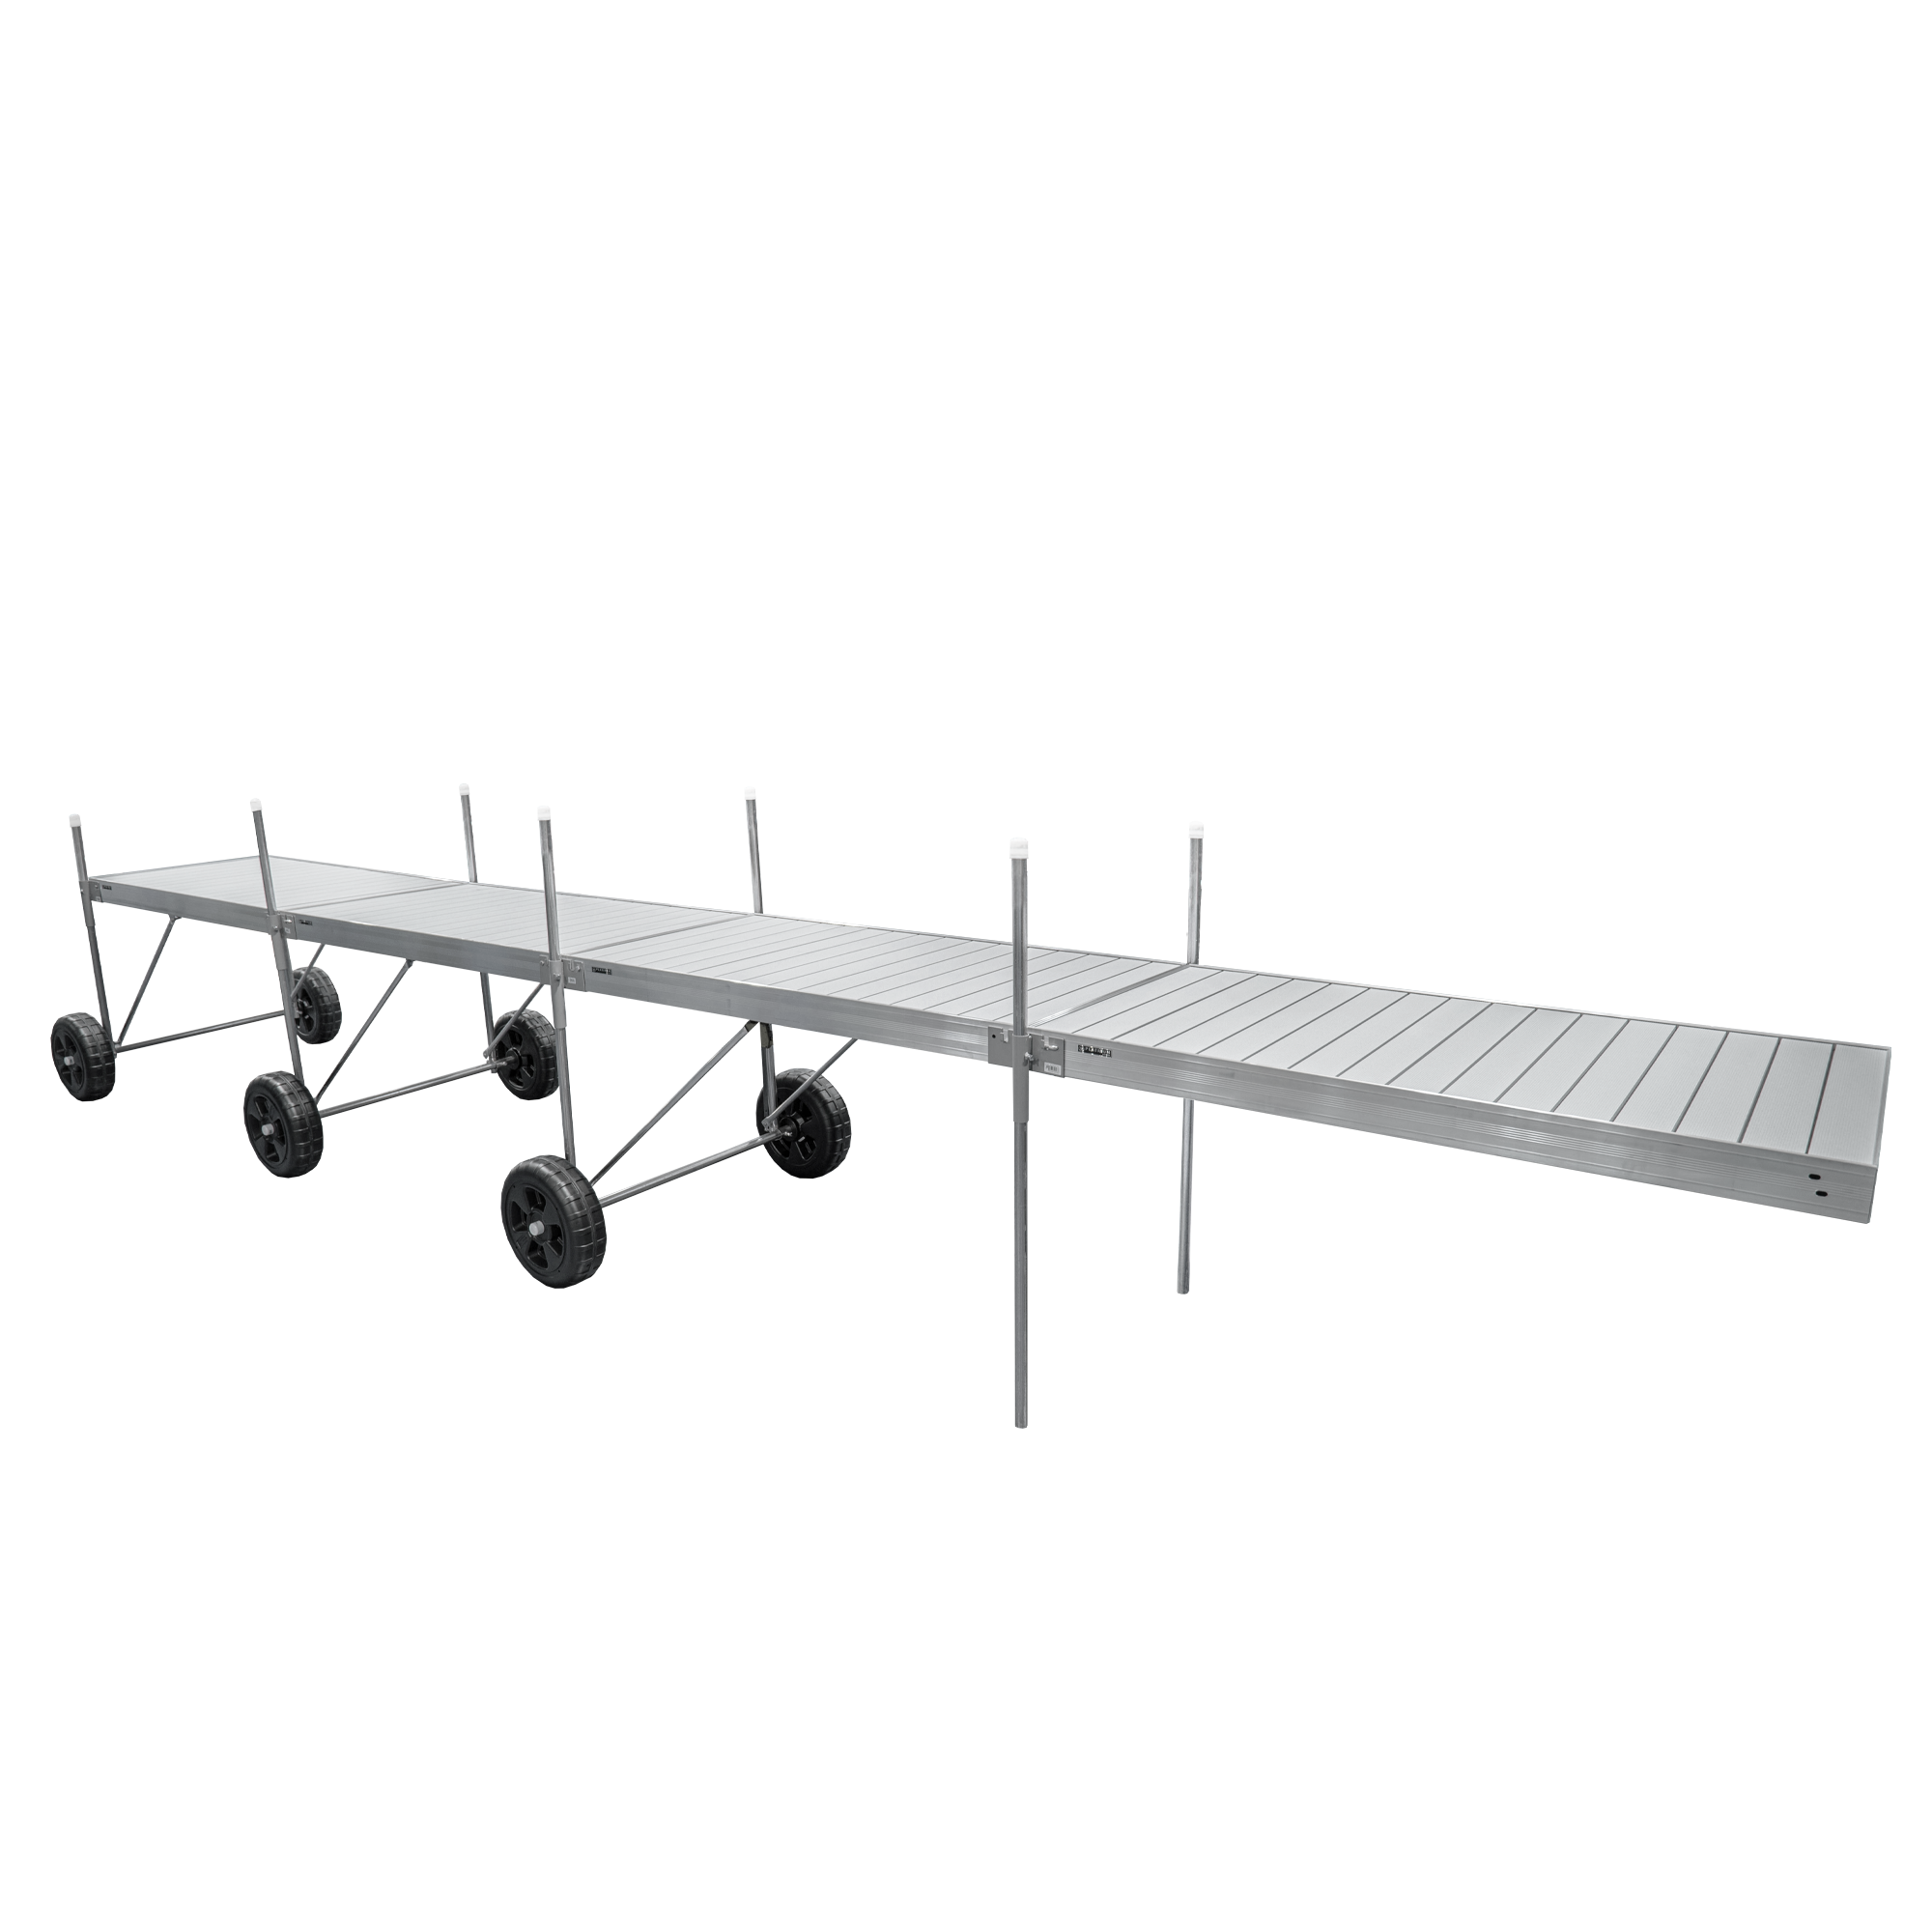 32 ft. Roll-In-Dock Straight System with Aluminum Frame and Aluminum Decking